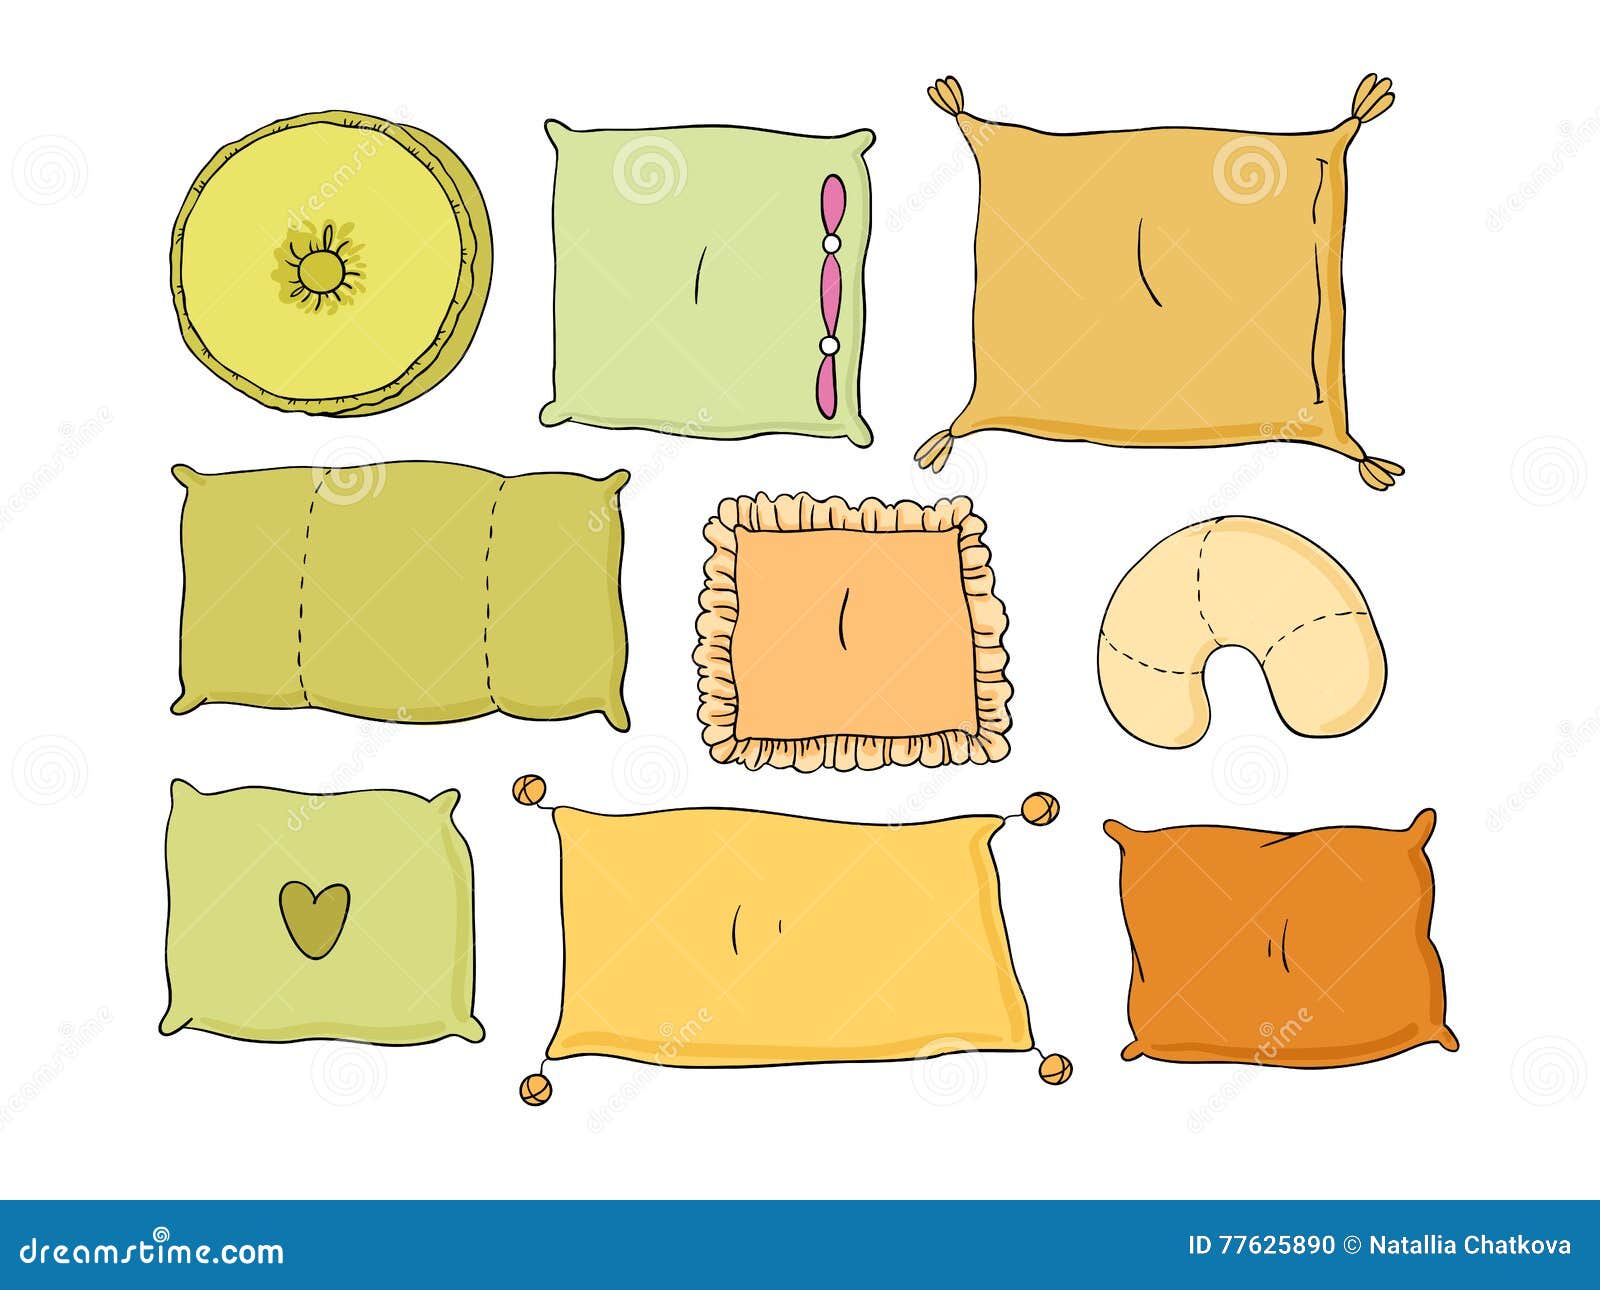 https://thumbs.dreamstime.com/z/types-sleeping-pillows-set-hand-drawing-isolated-objects-white-background-vector-illustration-77625890.jpg